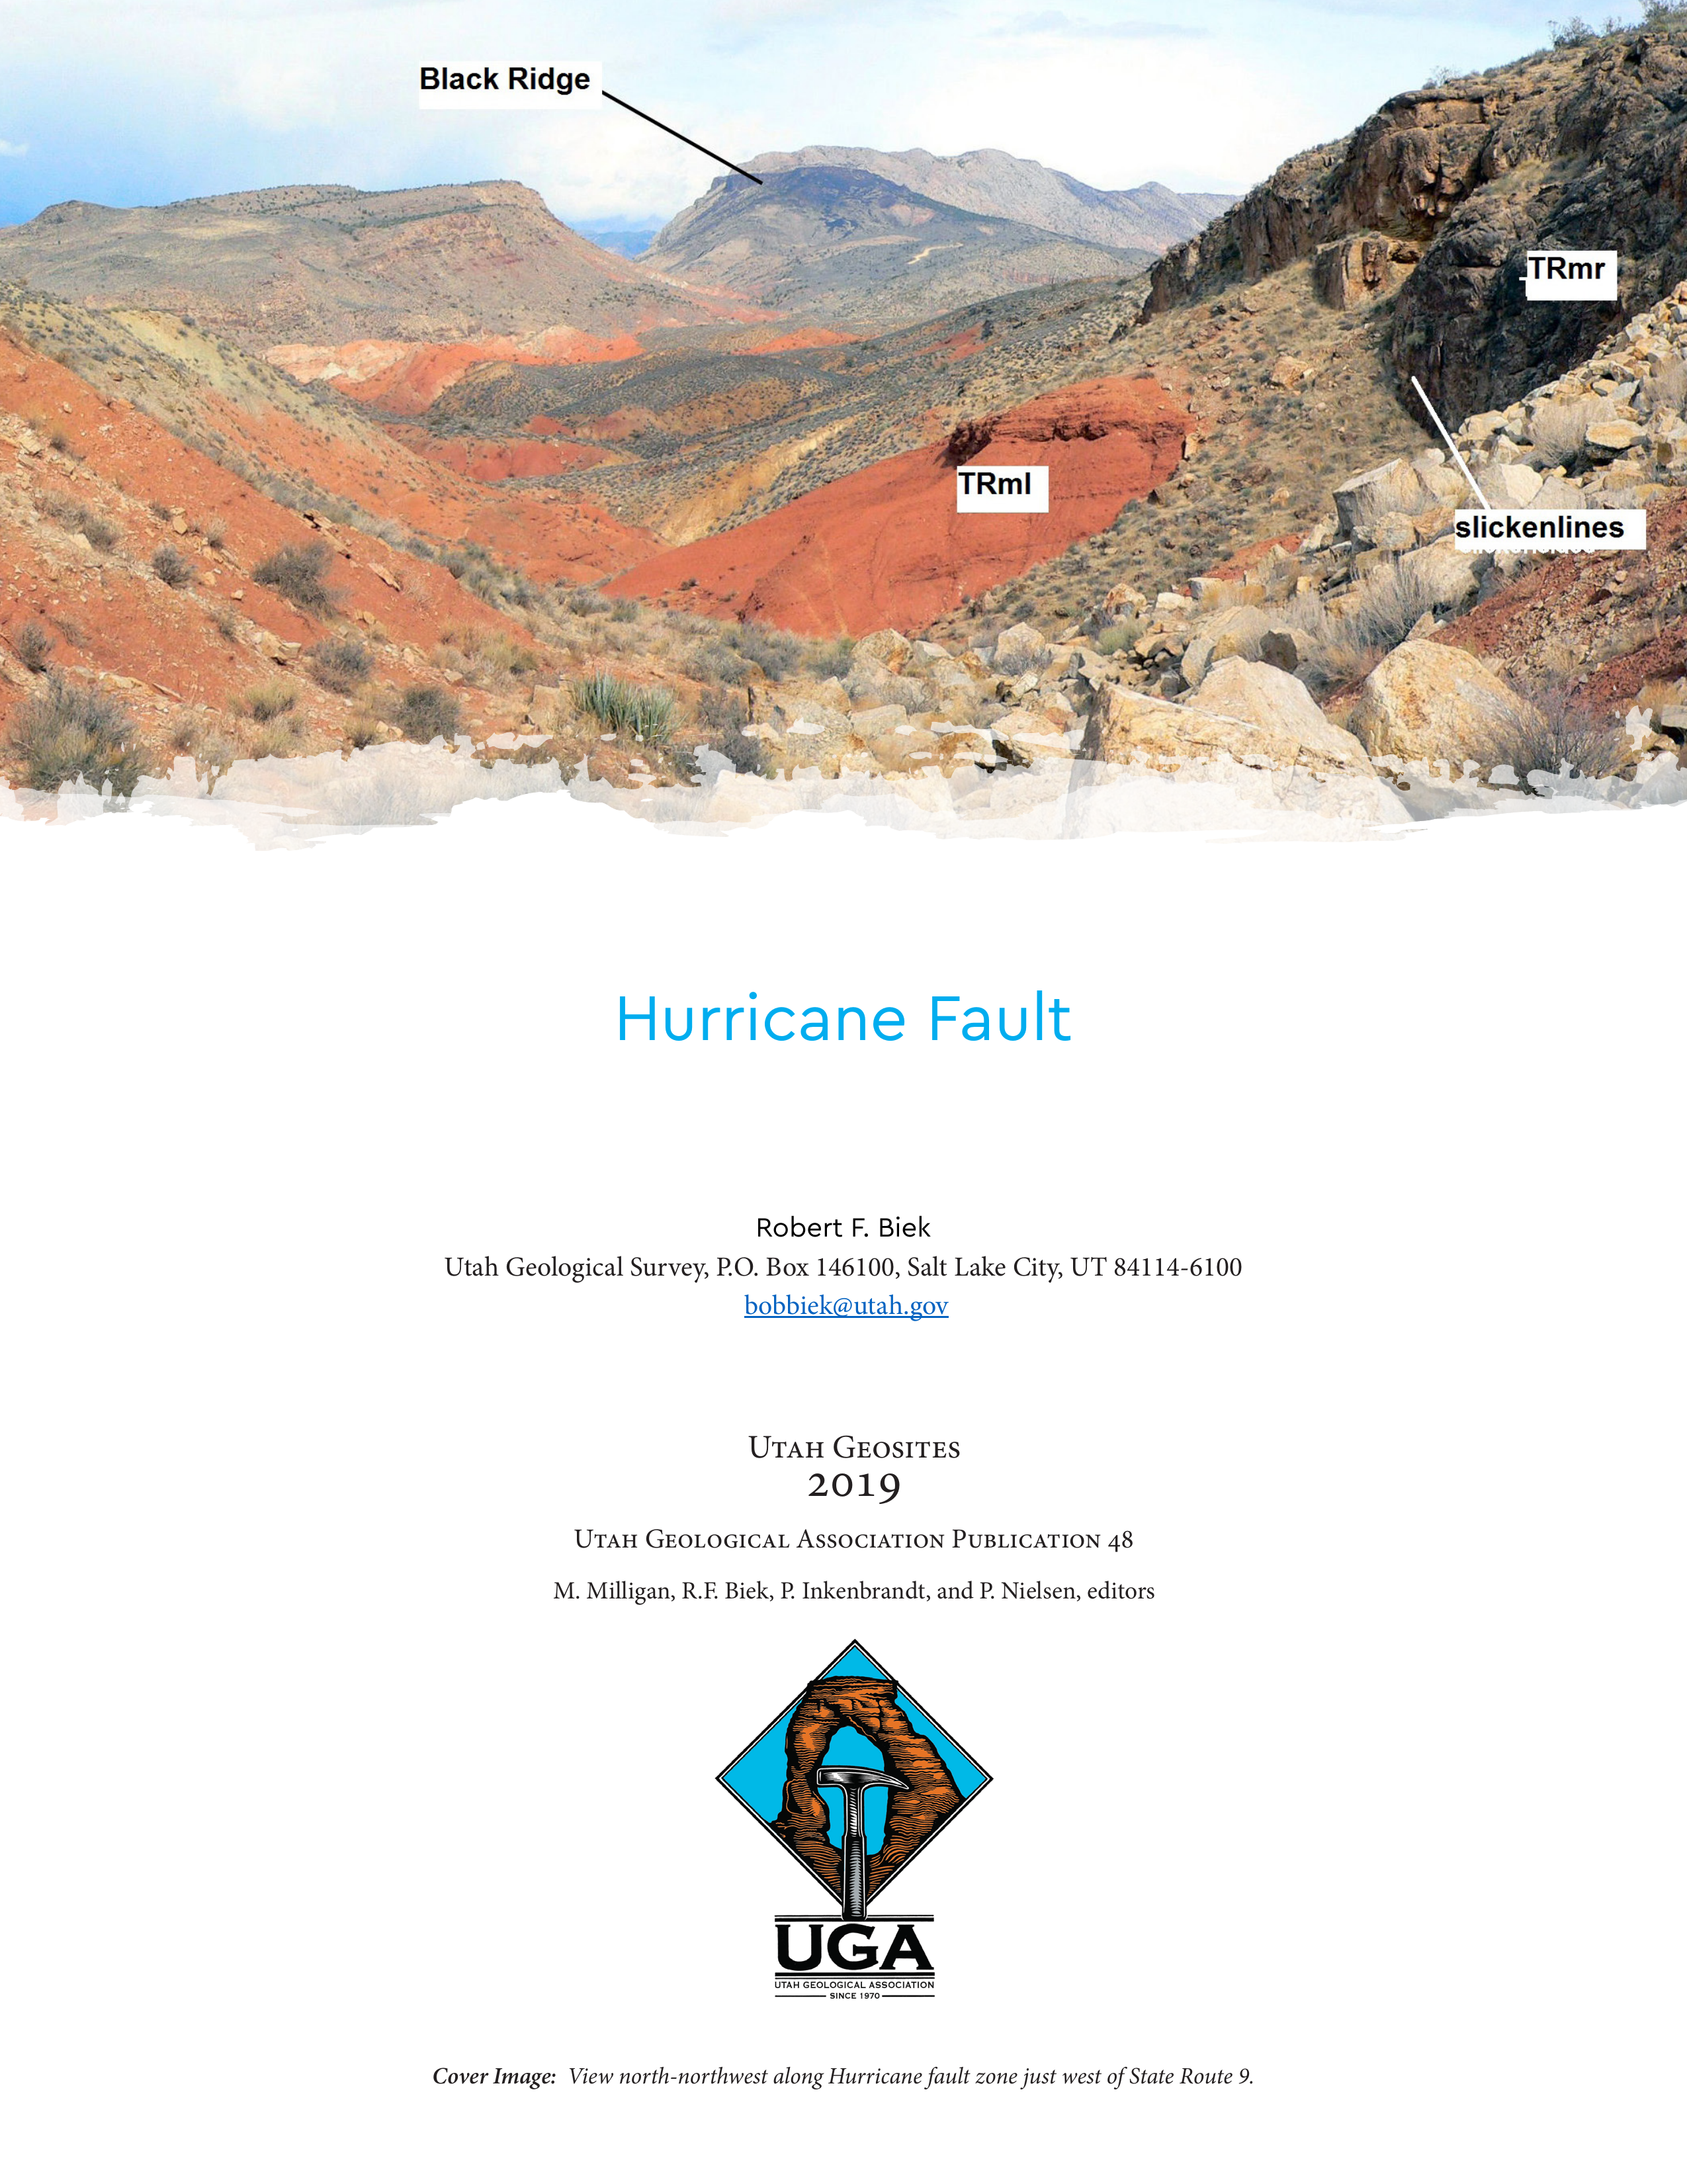 View of Hurricane Fault